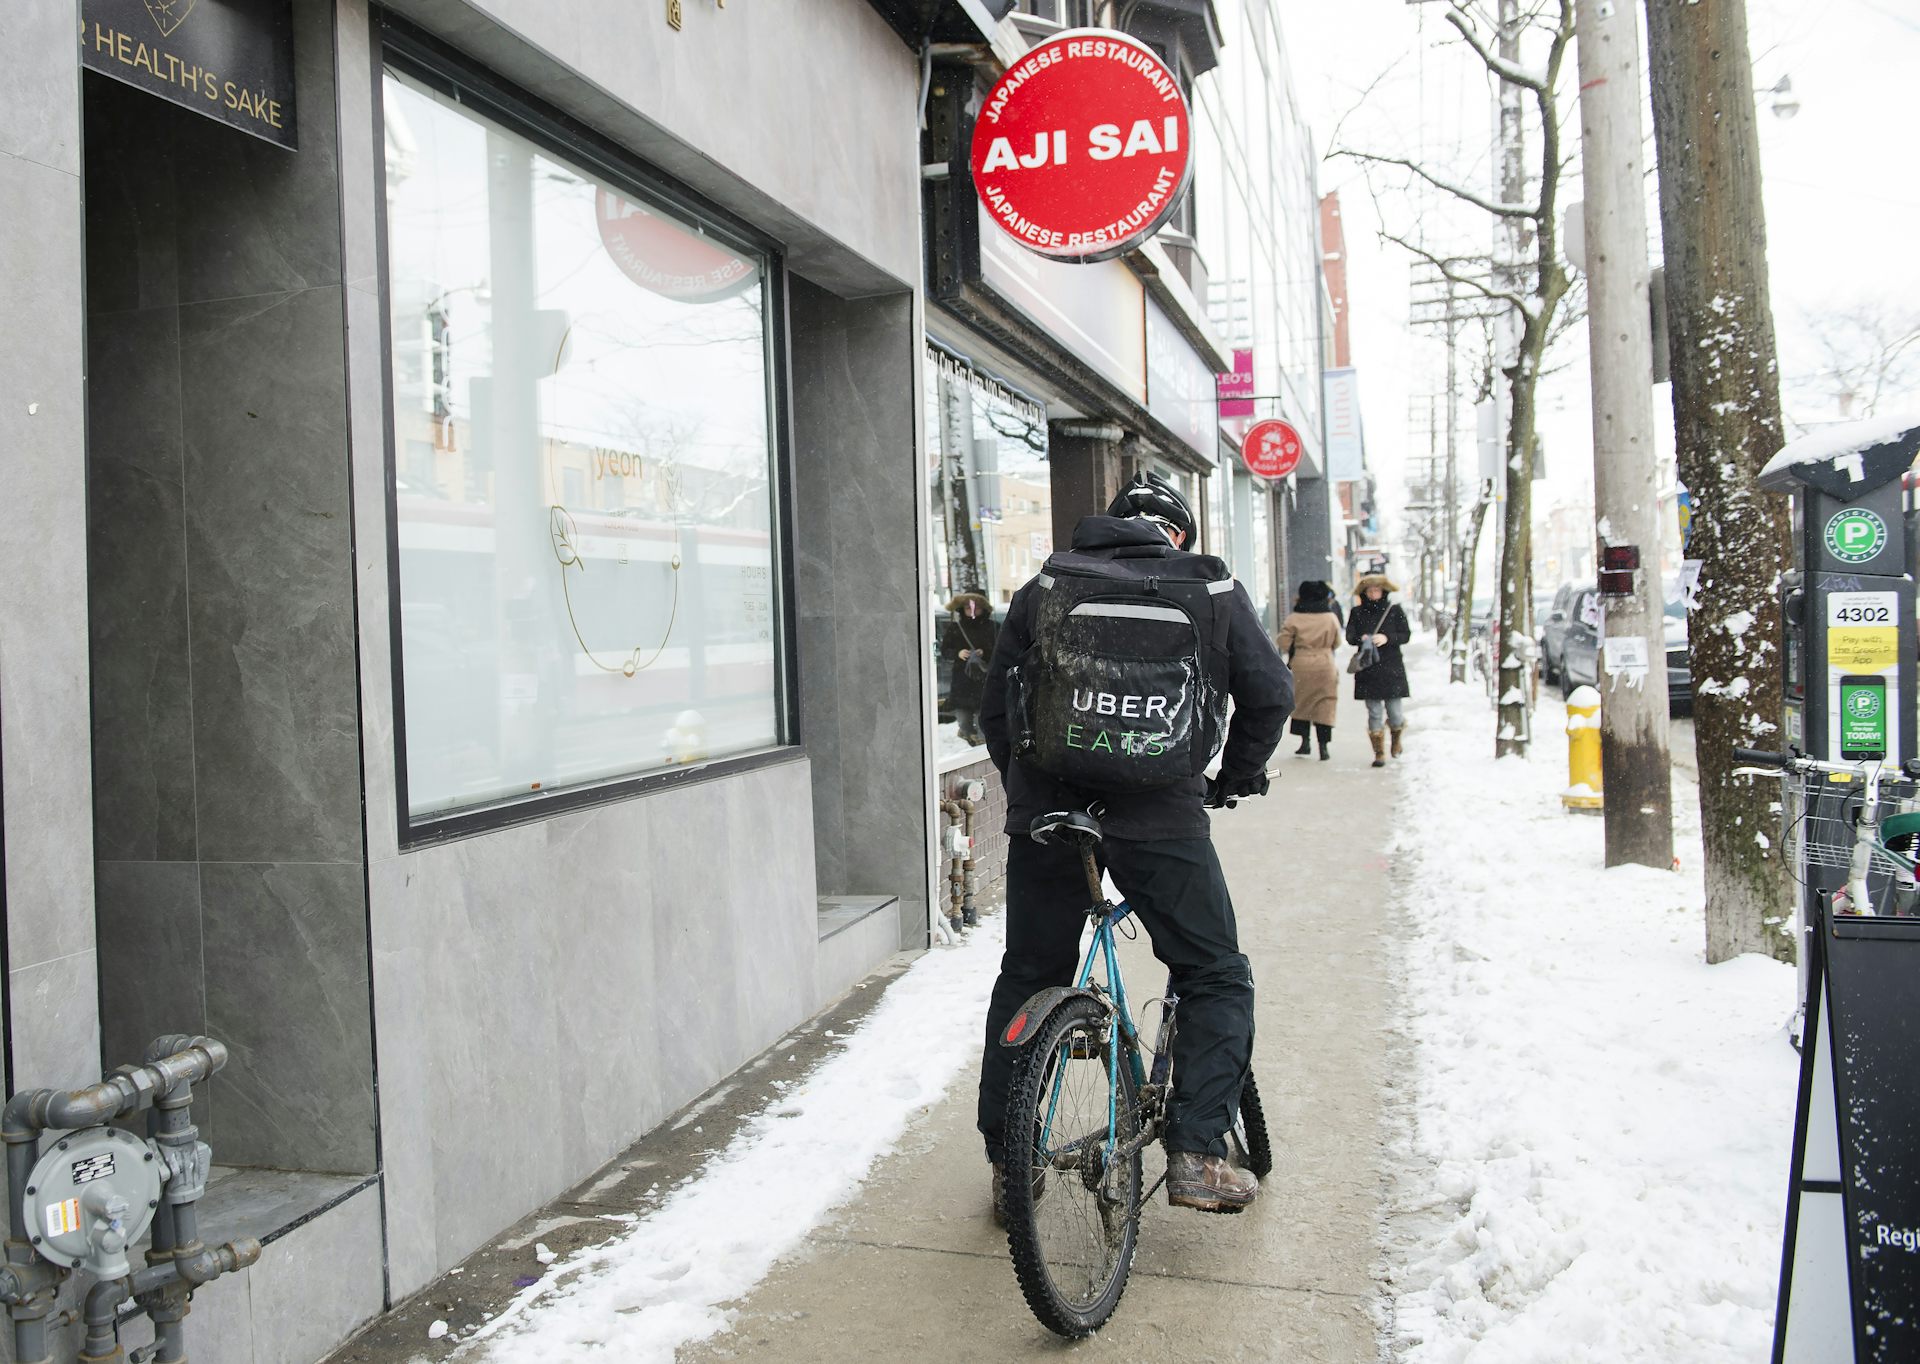 uber eats bicycle delivery pay